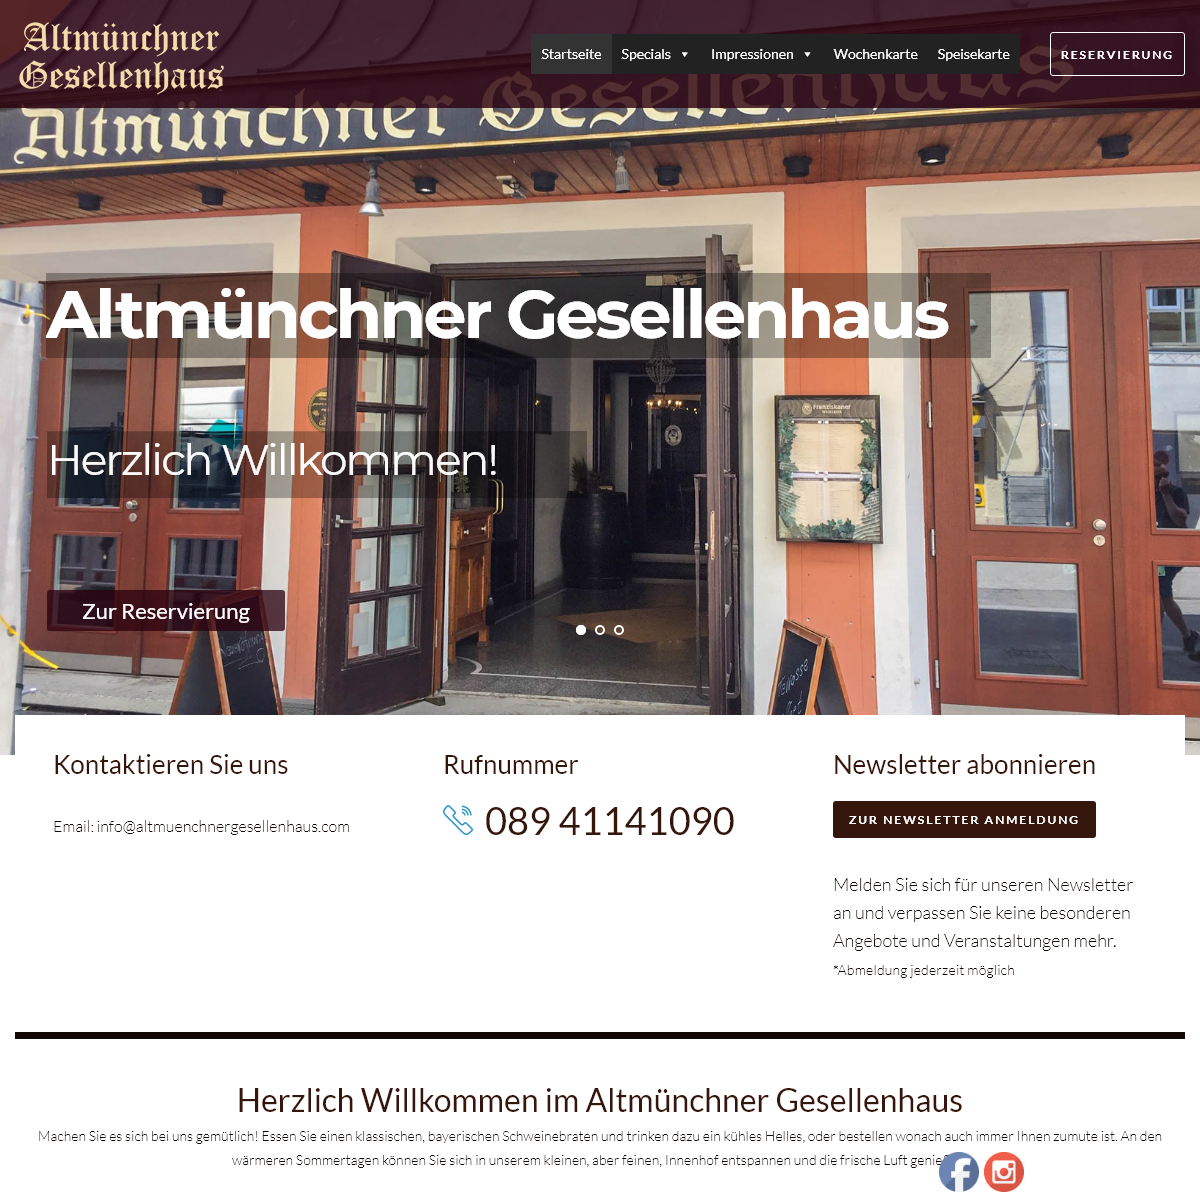 A complete backup of altmuenchnergesellenhaus.com